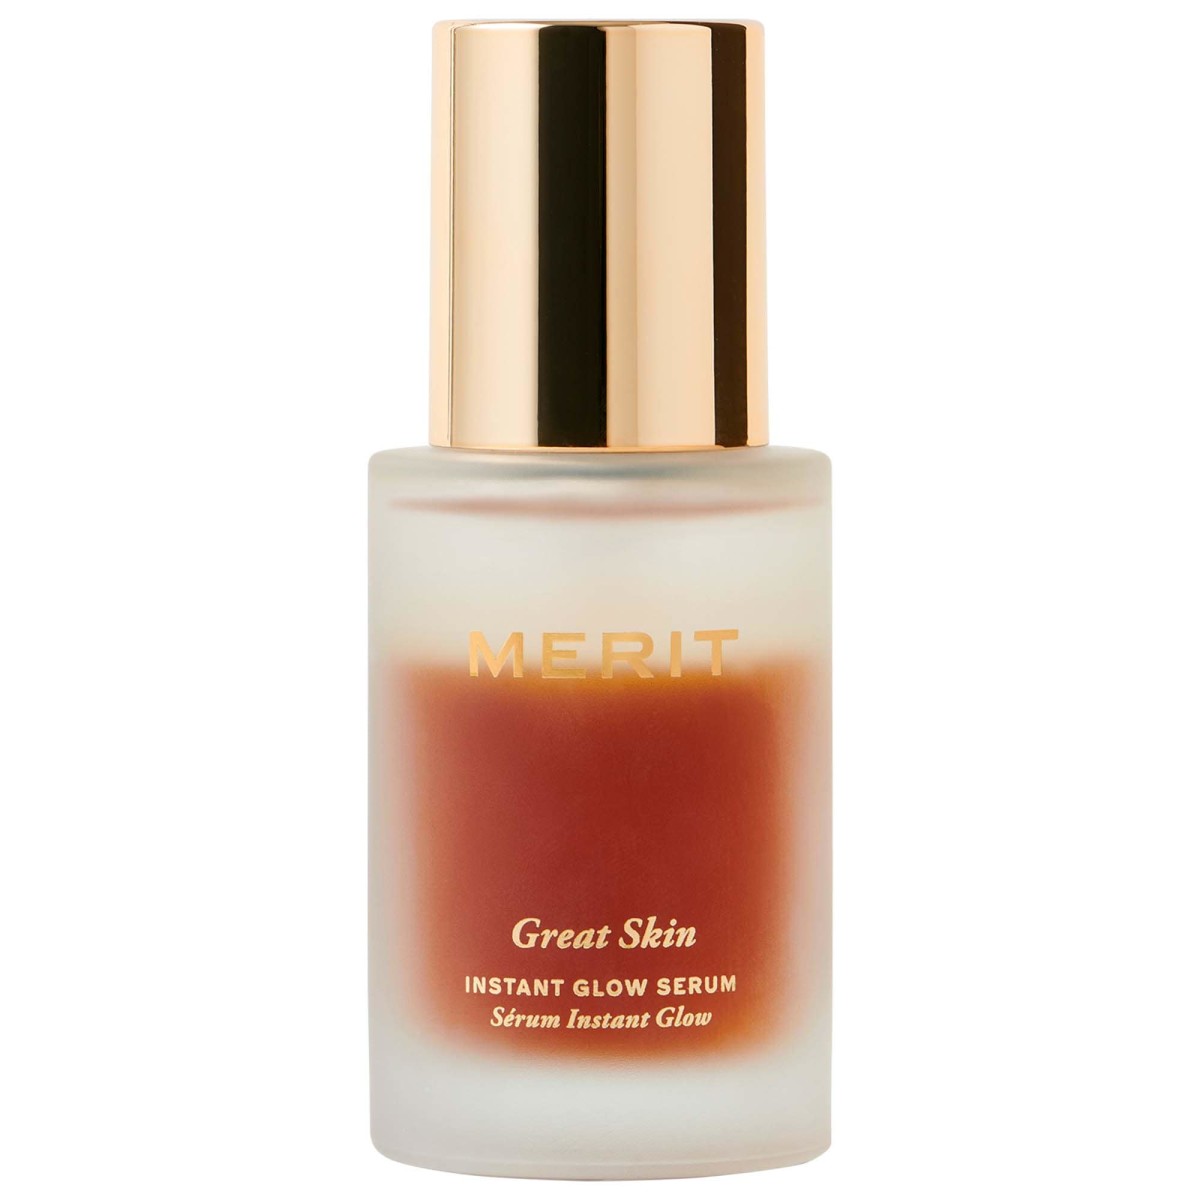 Merit Great Skin Instant Glow Serum, $38, available here